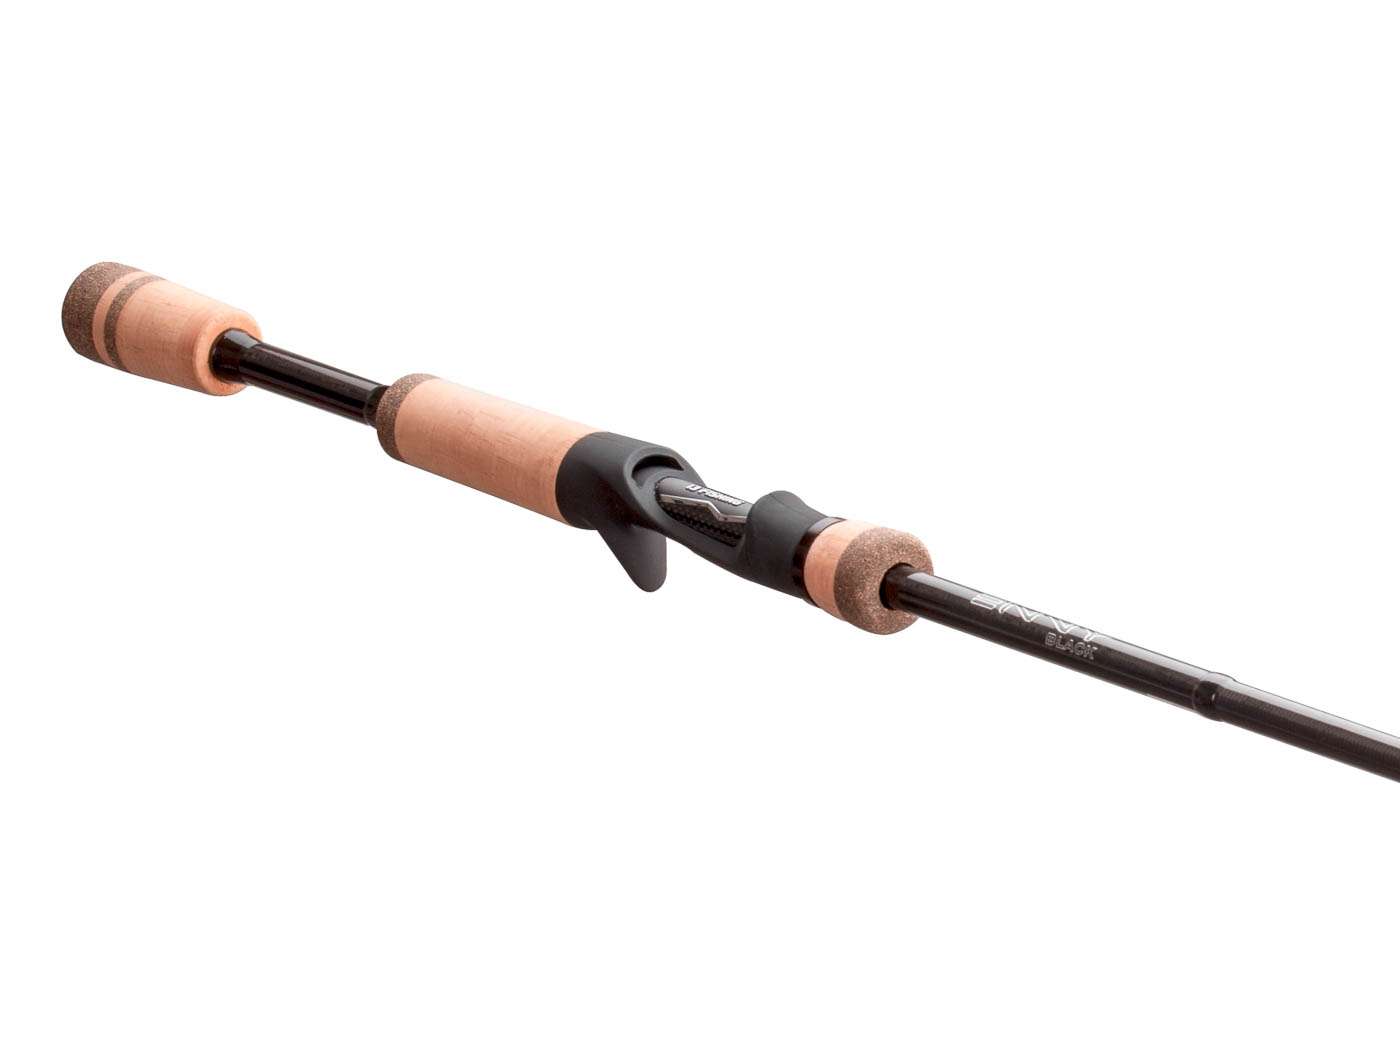 <p><strong>13 Fishing Envy Black III</strong></p><p>Carbon fiber is the standout feature of the Envy Black III, but not just any carbon fiber. This rod is made with 13 Fishingâs in-house 46 Ton Japanese Toray, with its superior strength and light weight. The designers didnât stop there with the top-shelf features. The rod is perfectly balanced with hand selected, premium Portuguese 5A Cork, in a split grip handle. An Evolve Soft Touch Seamless Reel Seat completes the package. On the rod side, Fuji K Frame Guides with Zirconia inserts take this rod to the highest level. The bottom line? You get the perfectly tuned taper for a specific application. $315. <a href=